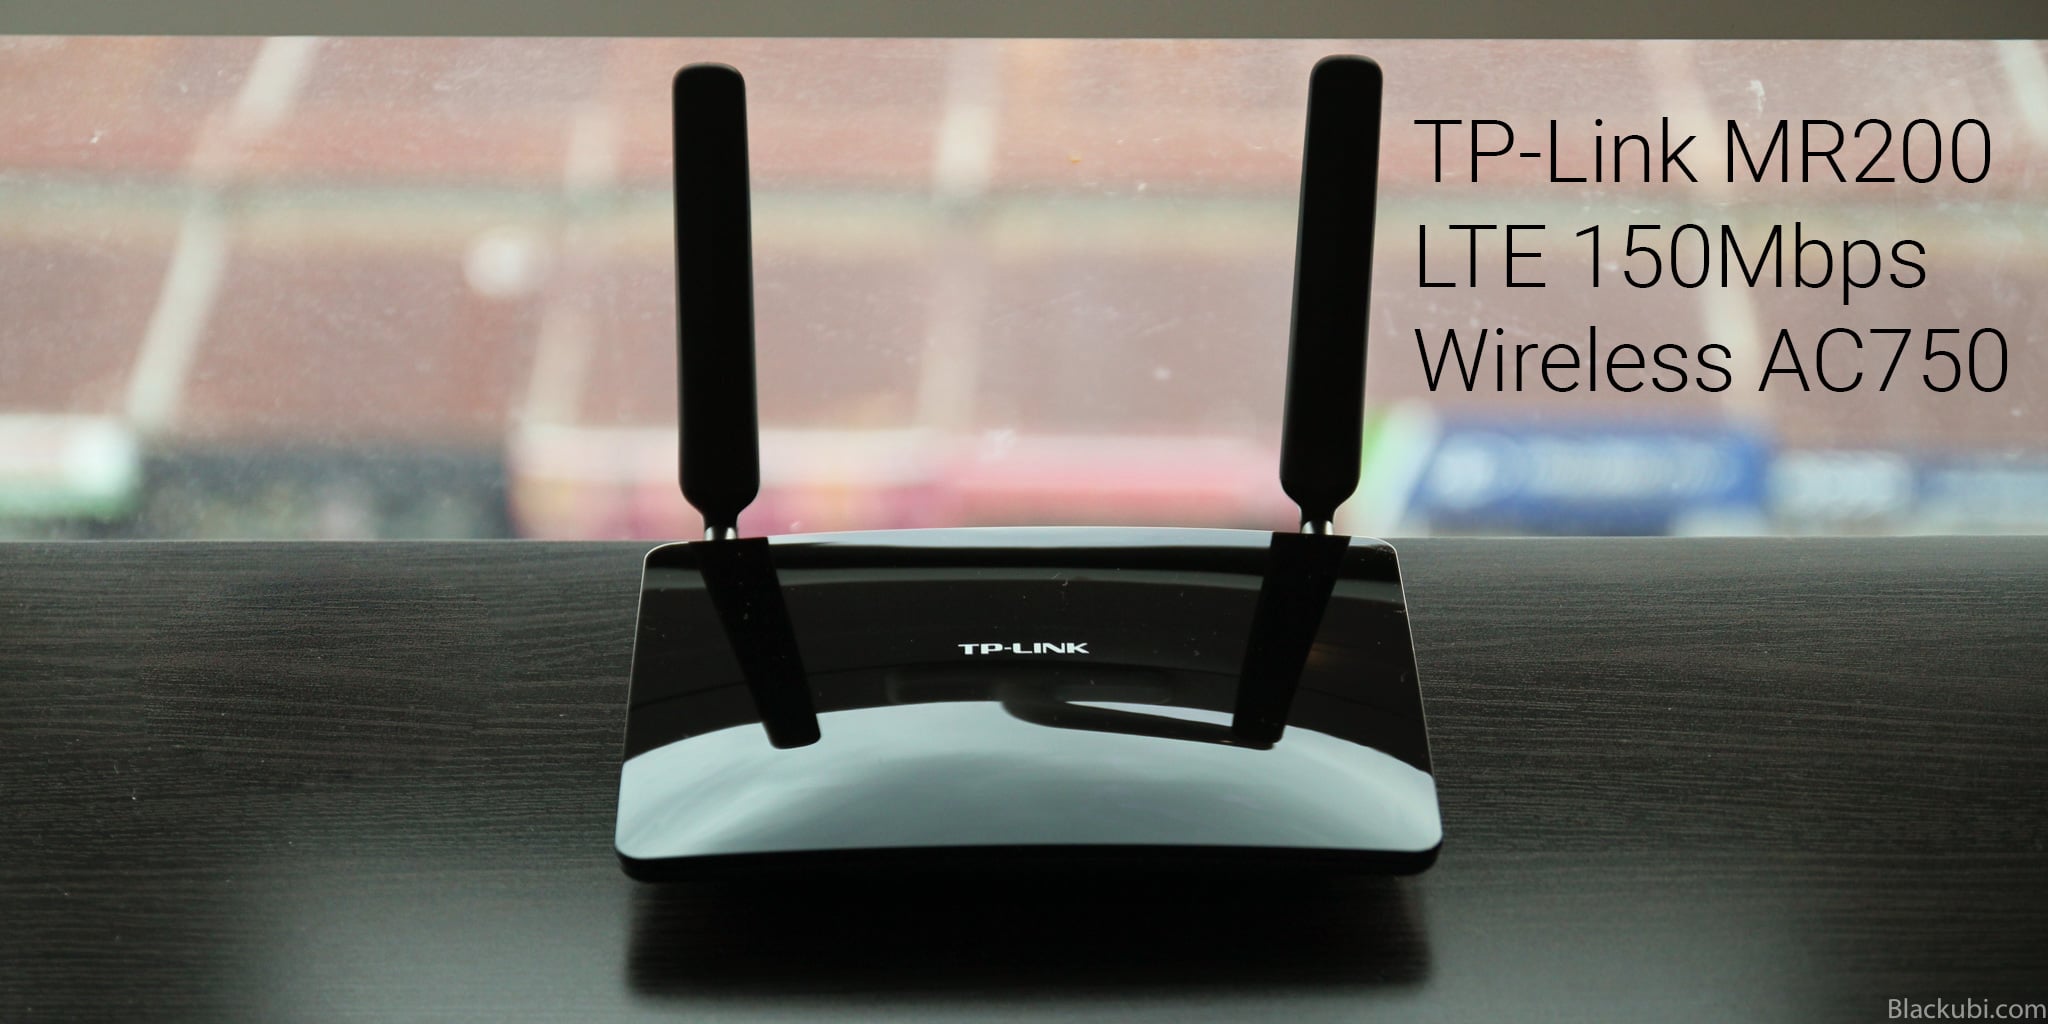 TP-LINK ARCHER MR200 AC750 Wireless Dual Band 4G LTE Router